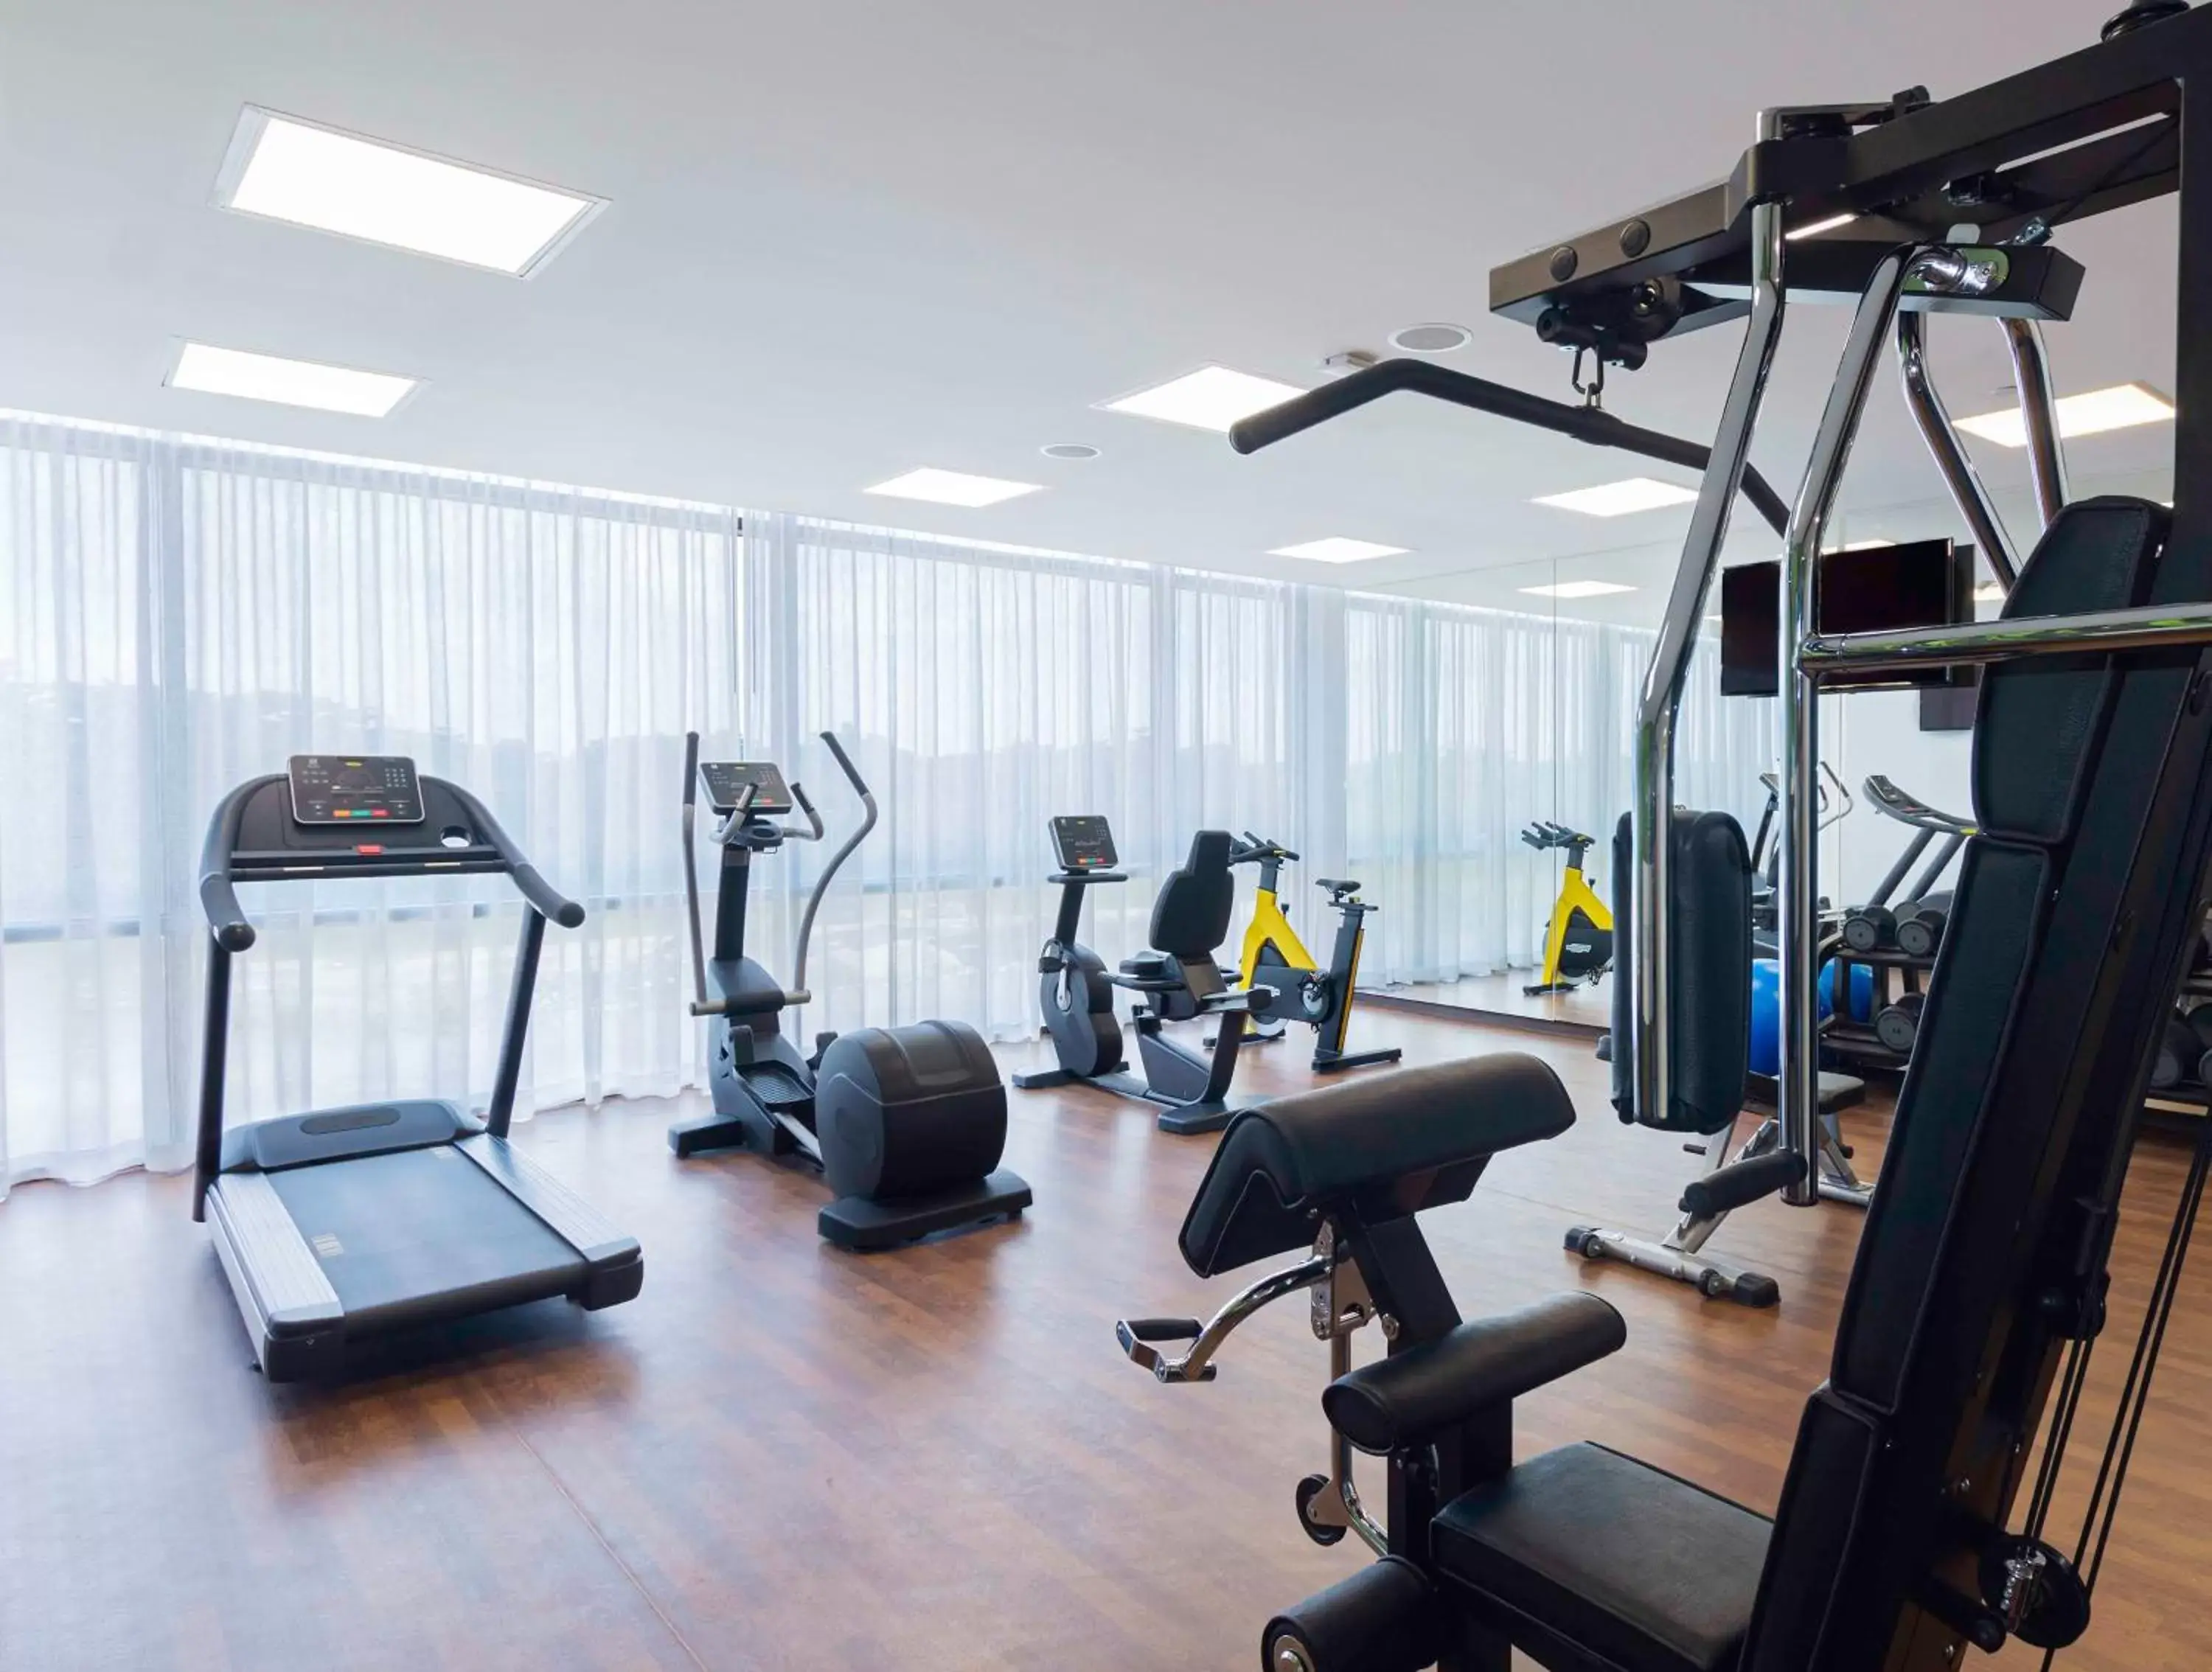 Fitness centre/facilities, Fitness Center/Facilities in Avani Cancun Airport -previously NH Cancun Airport-